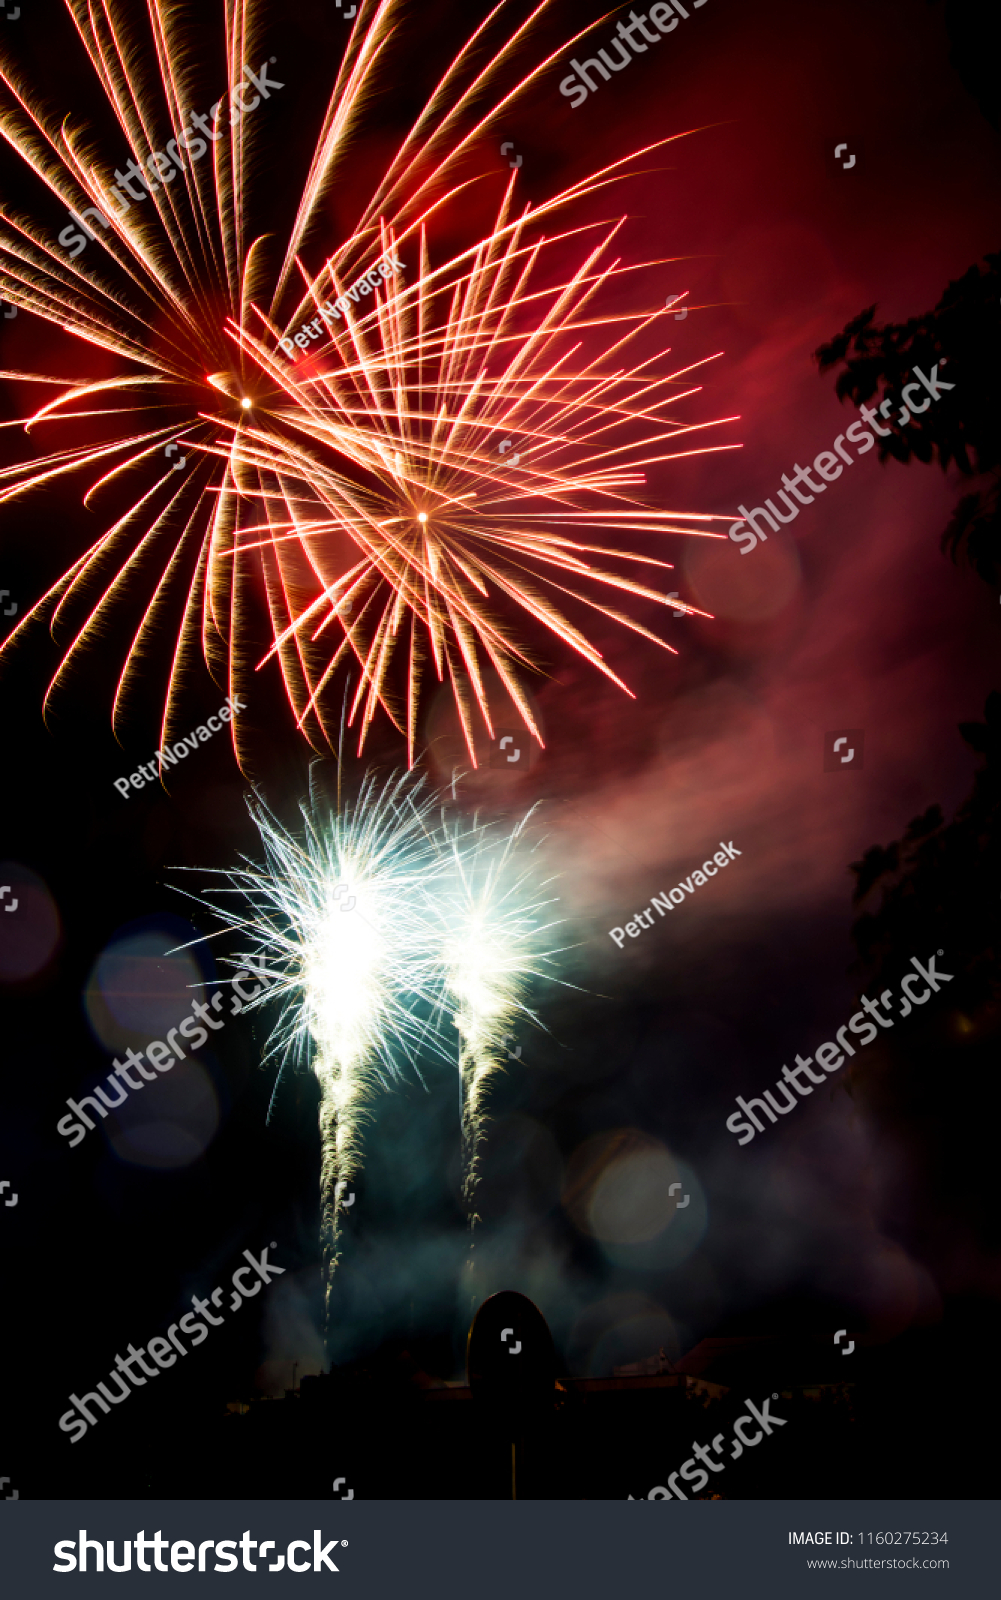 Red firework. Amazing fireworks, fireworks 2019, fireworks background, fireworks event, Celebration in the town. #1160275234